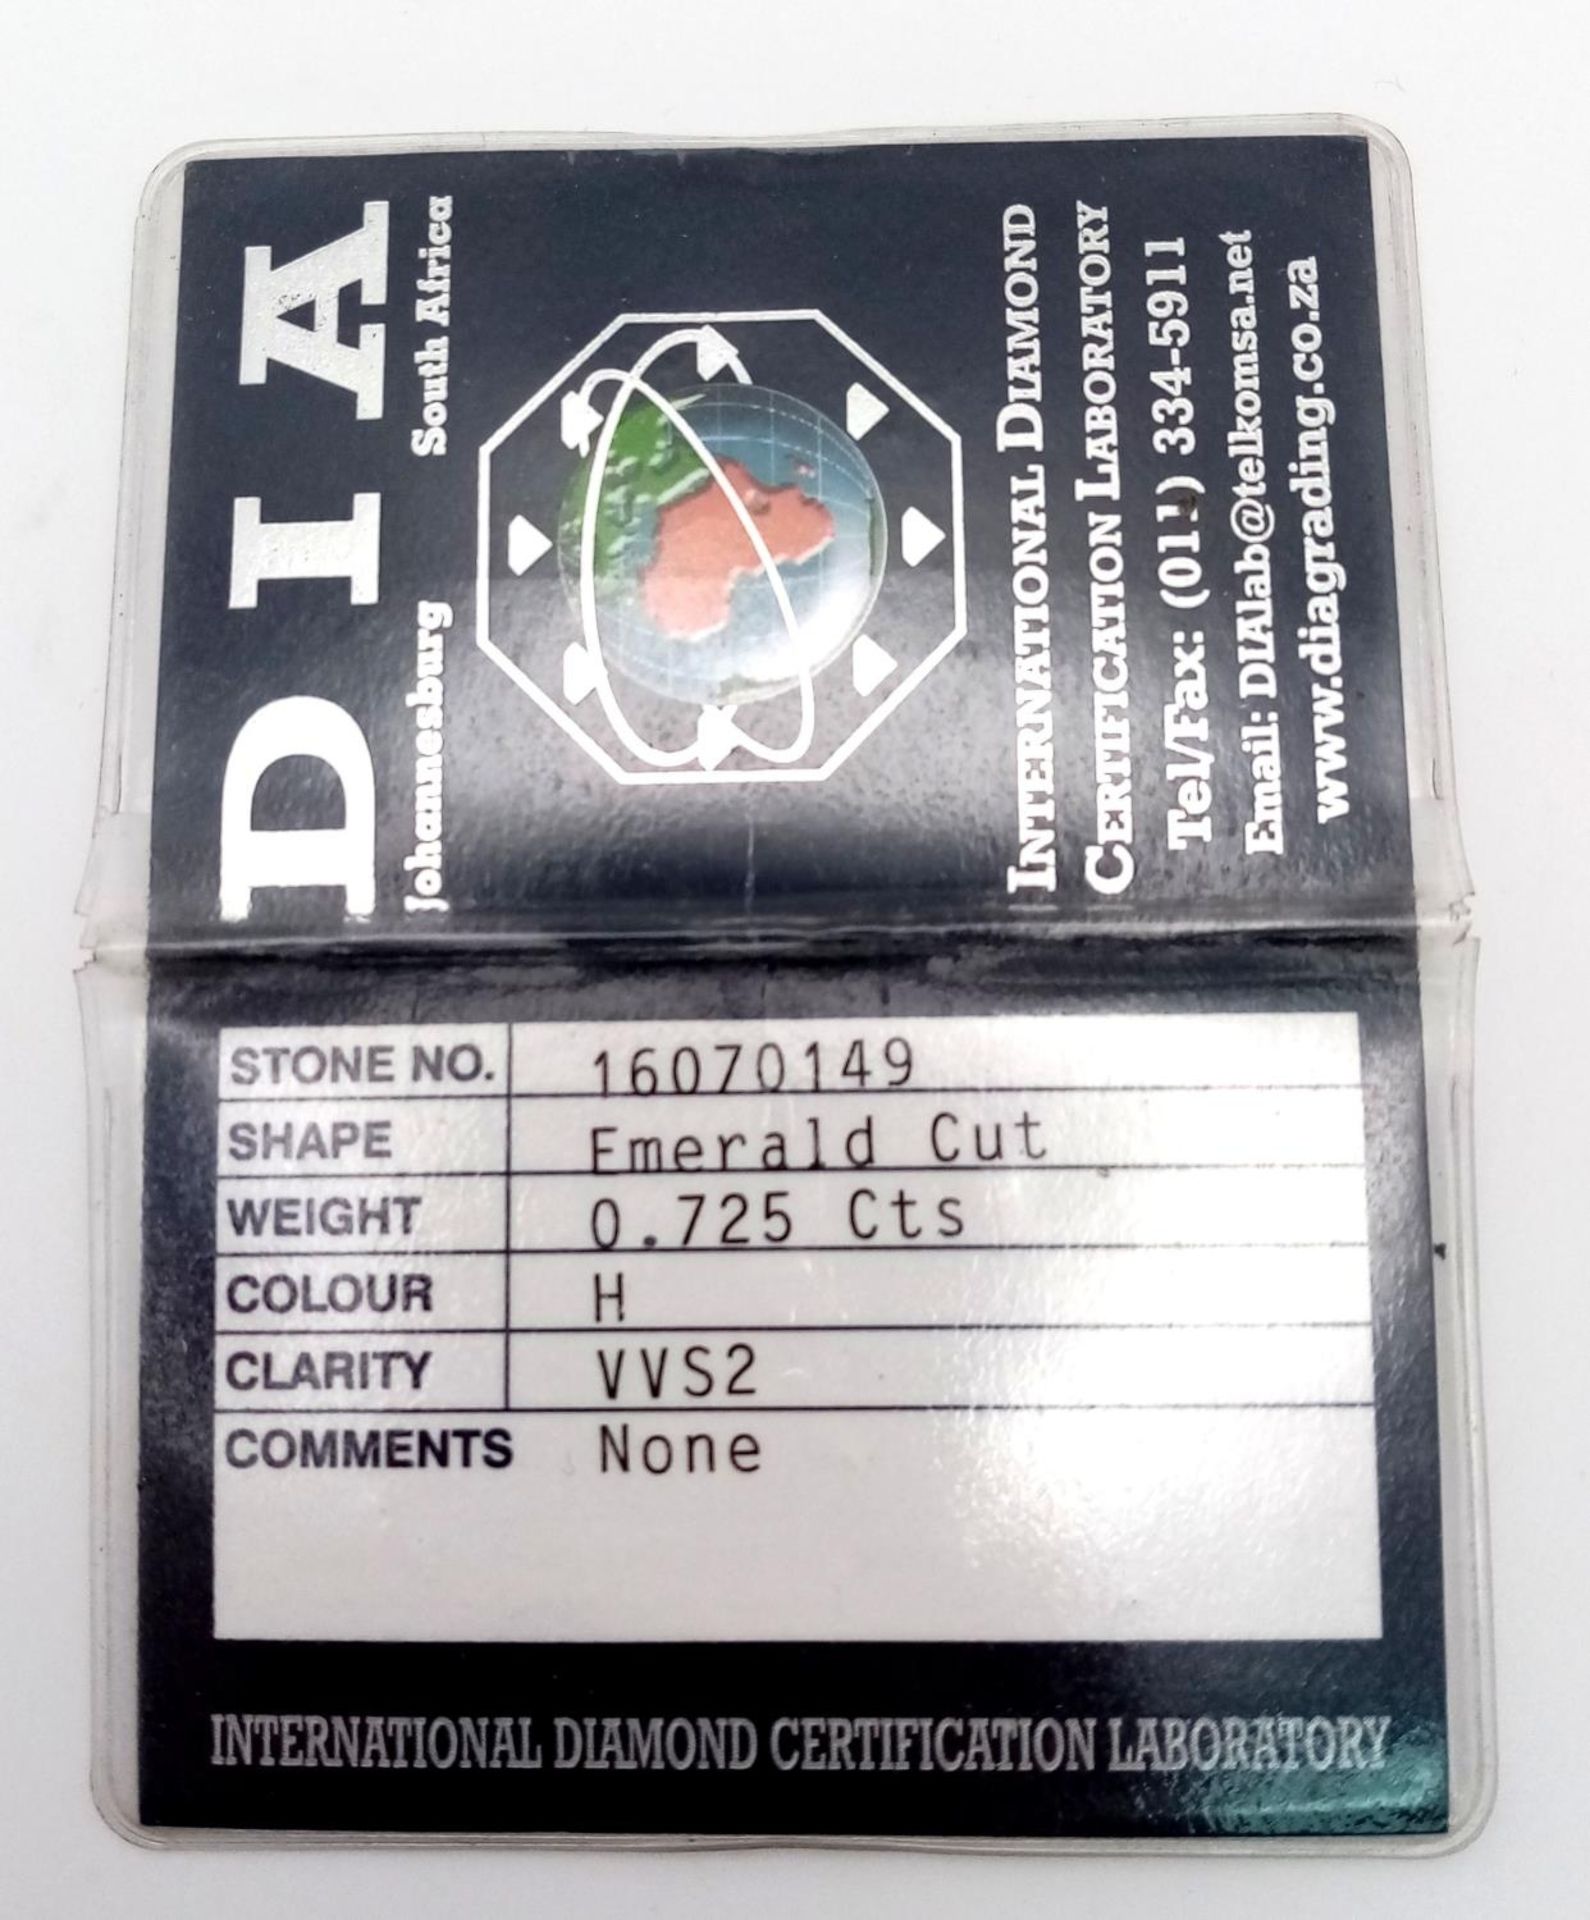 A 0.725ct Emerald Cut Diamond. VVS2 clarity. H colour. Comes with a DIA certificate. - Image 8 of 8